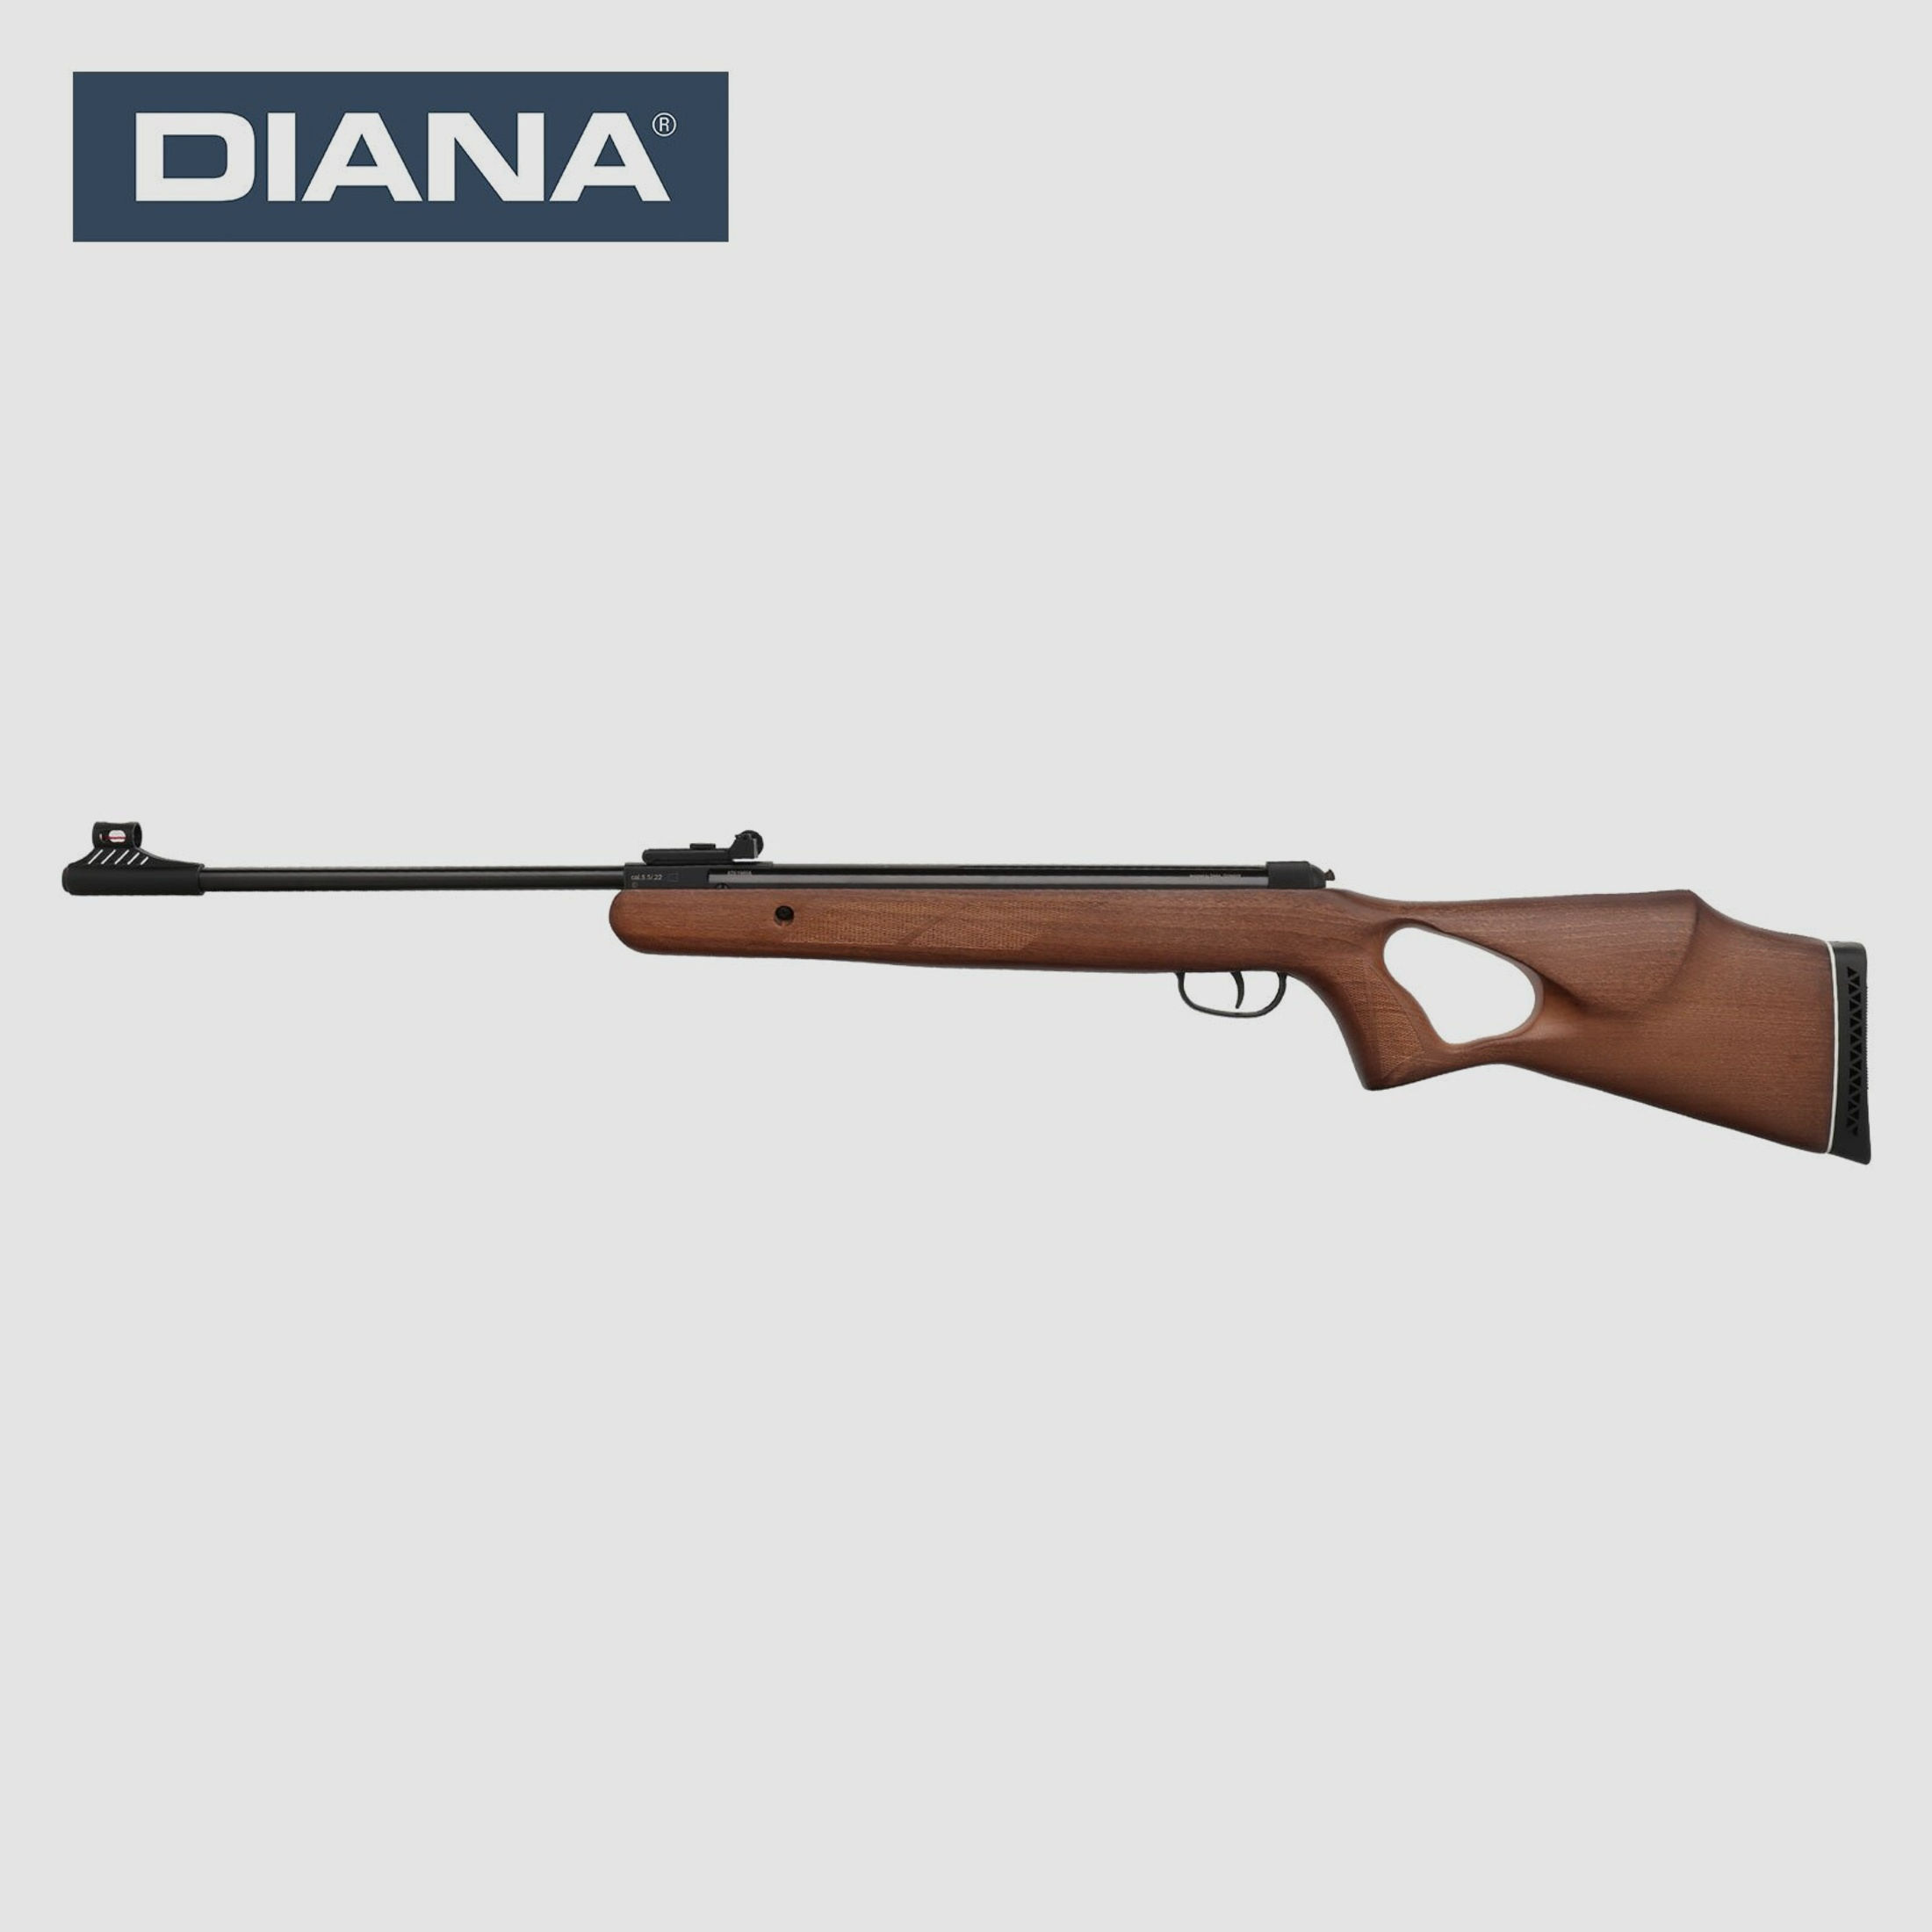 Diana 250 two-fifty Knicklauf Luftgewehr Kaliber 5,5 mm Diabolo (P18)